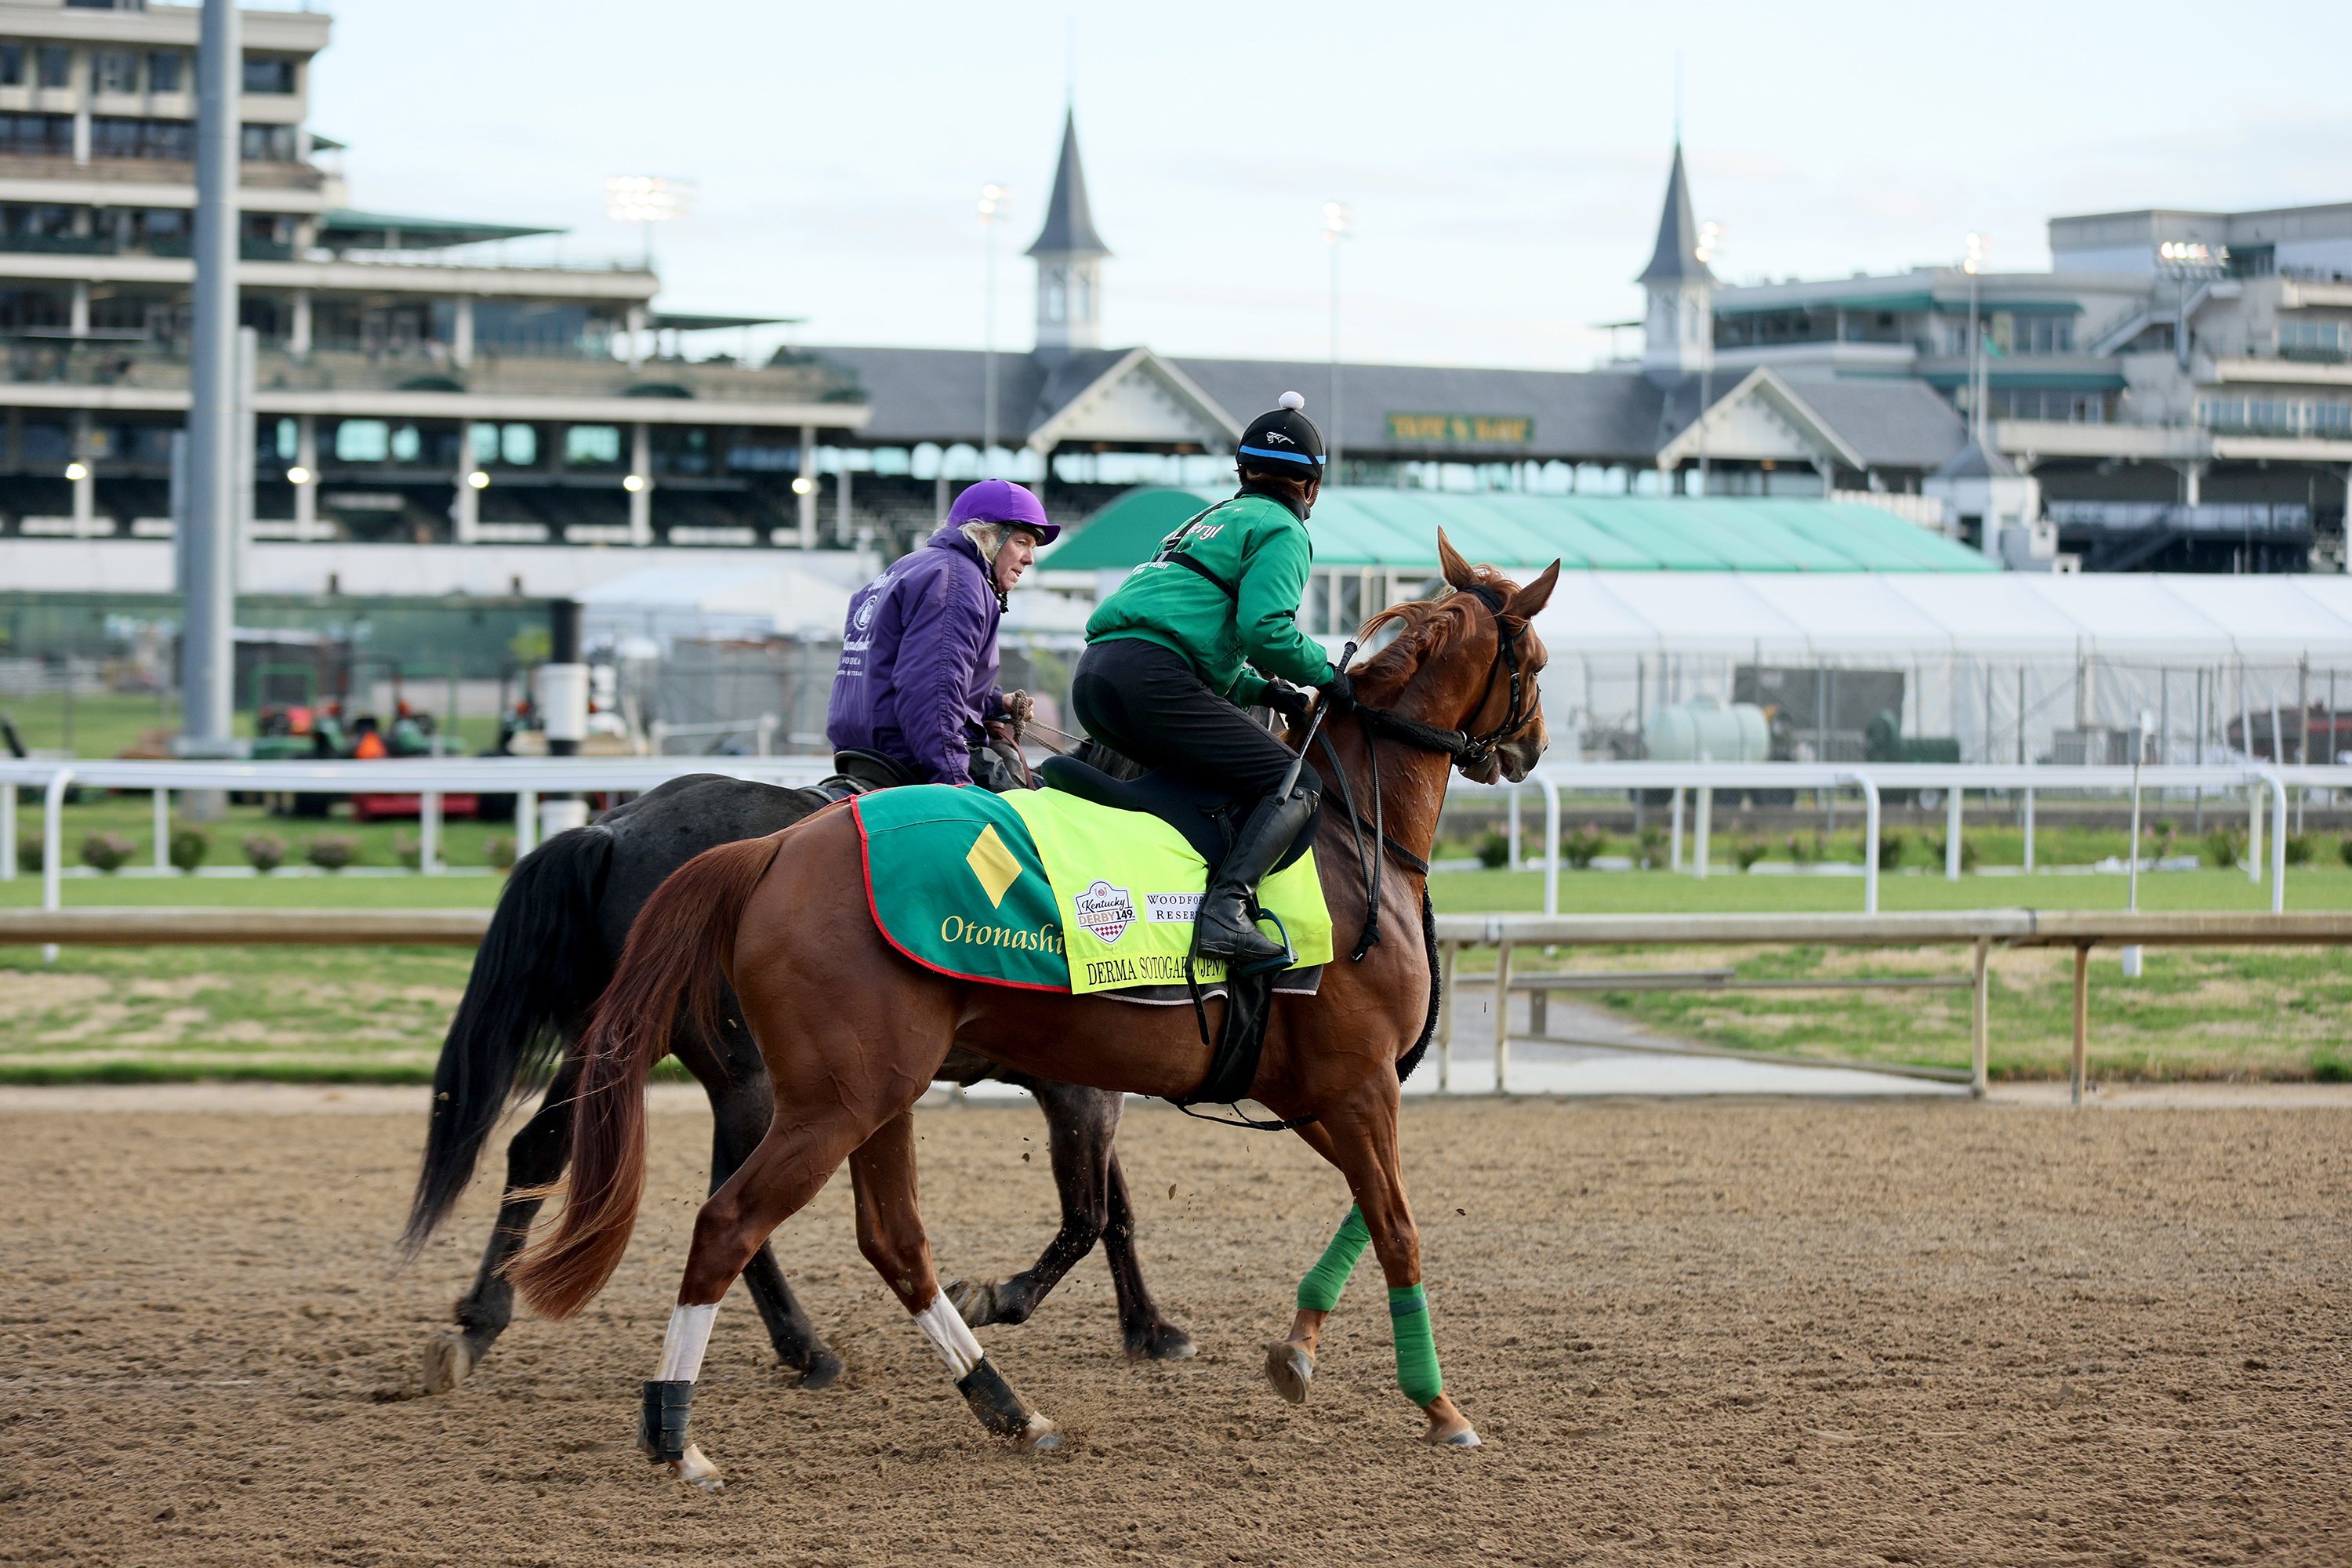 Kentucky Derby 2023: Start time, horses, channel, how to watch and